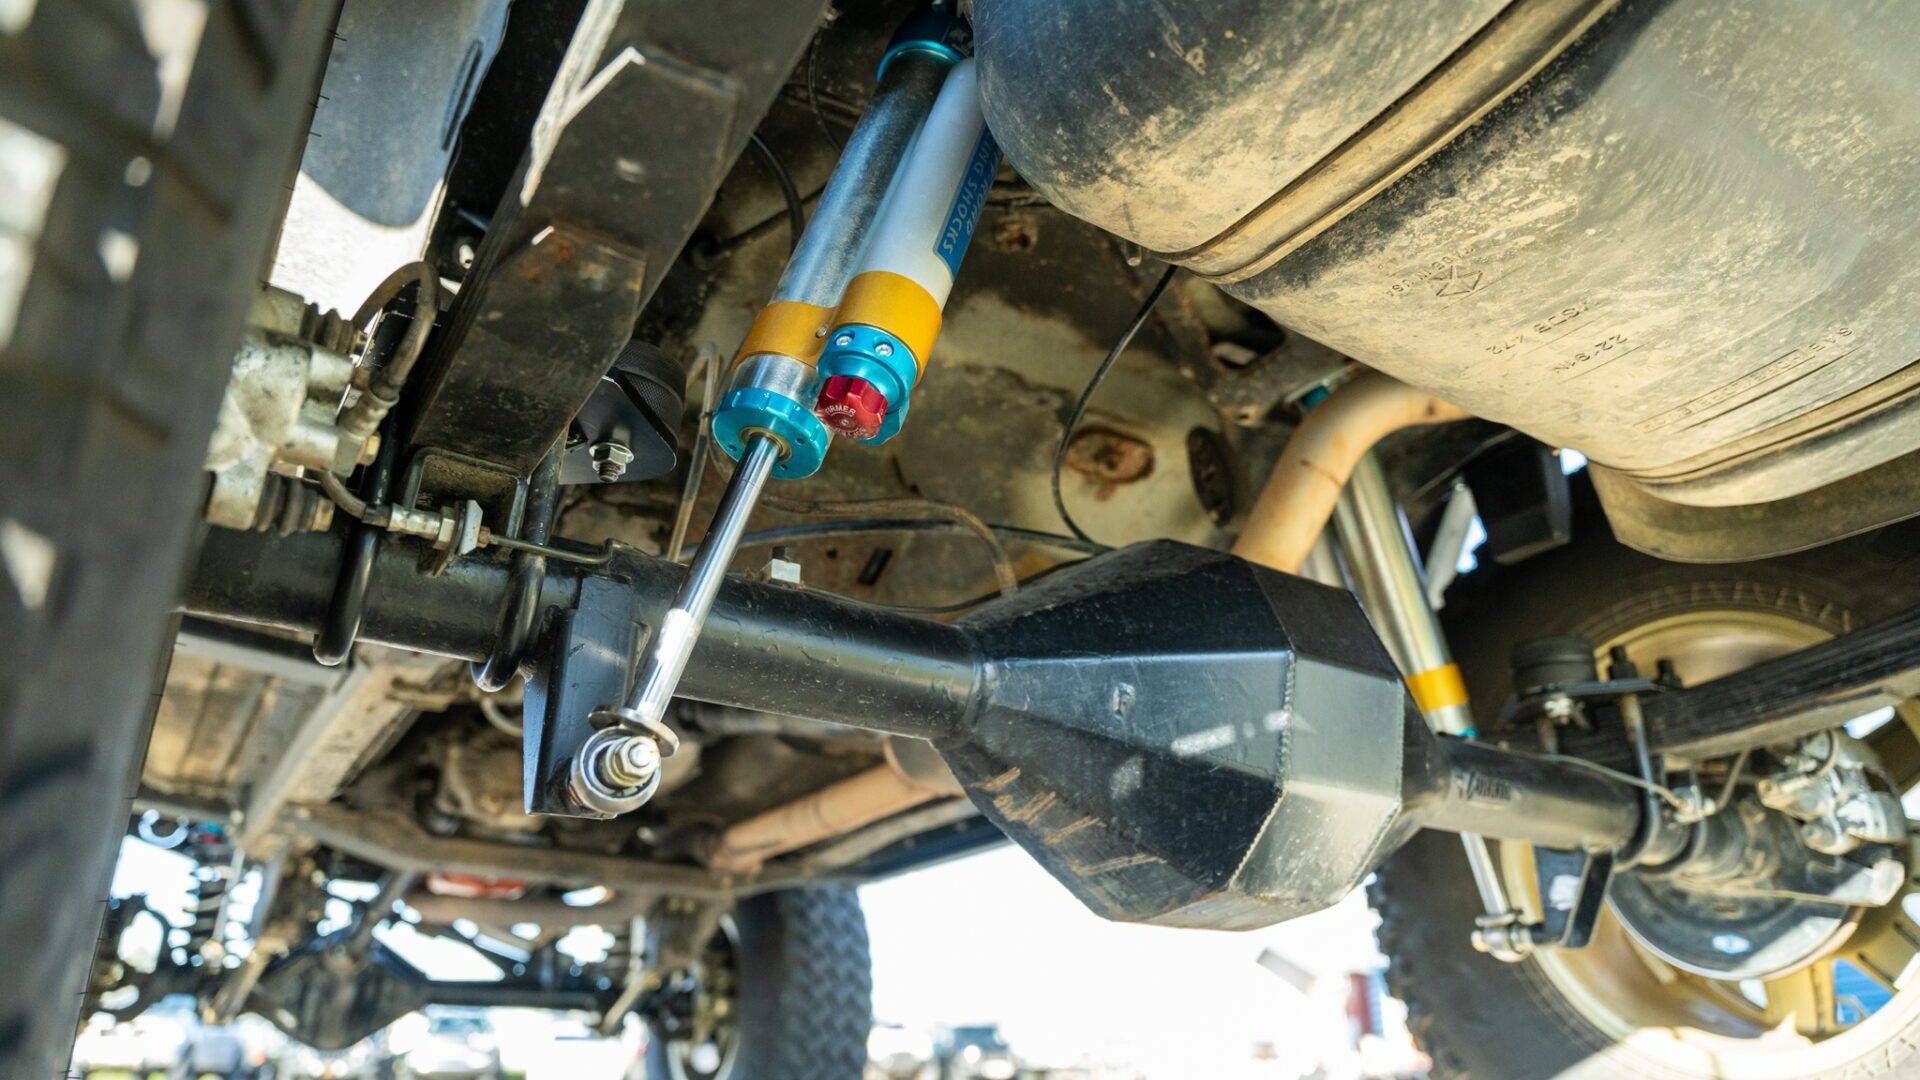 Jeep rear suspension with King shocks